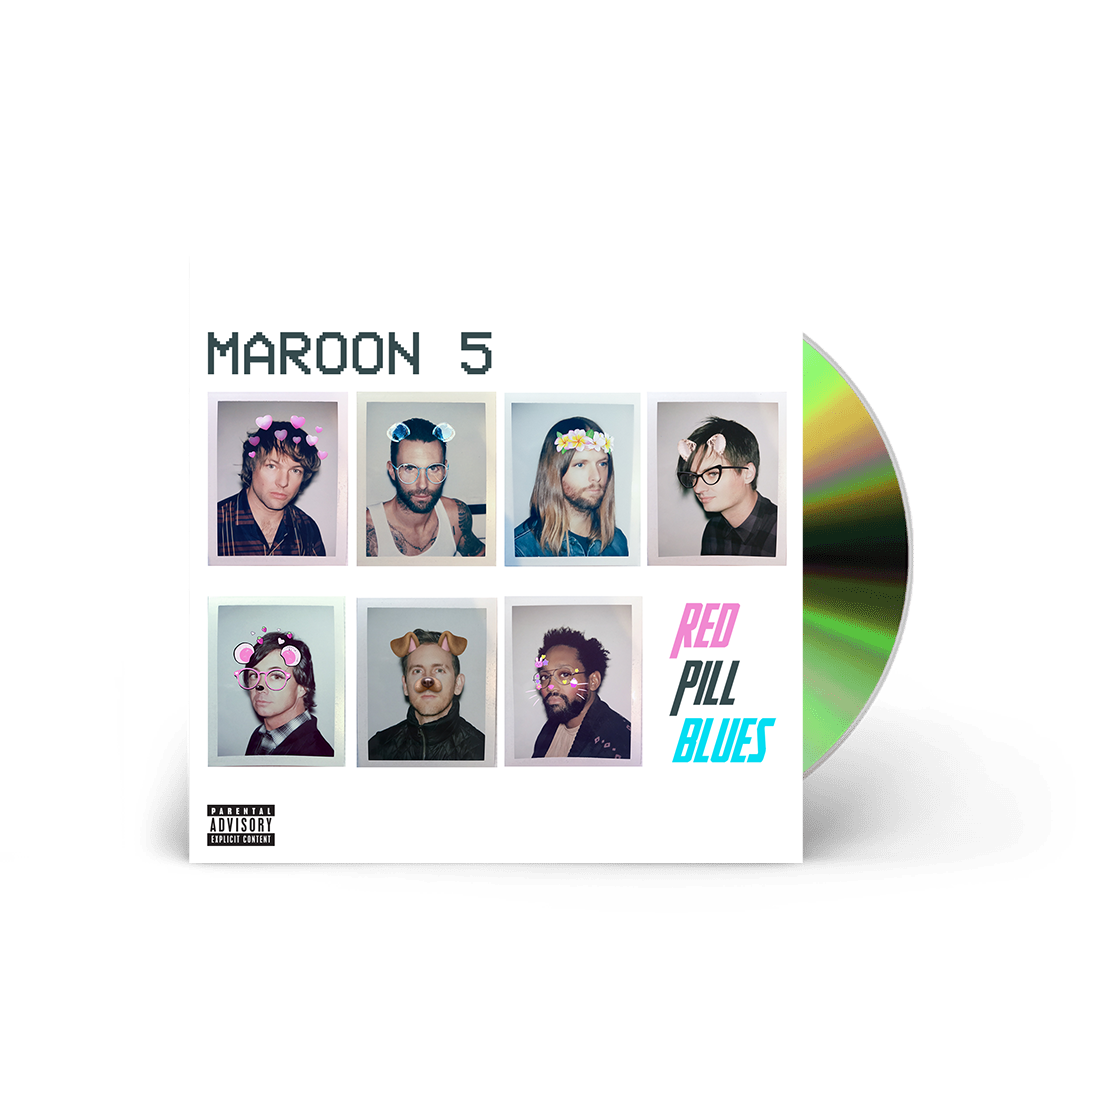 Maroon 5 - Red Pill Blues 2CD Deluxe